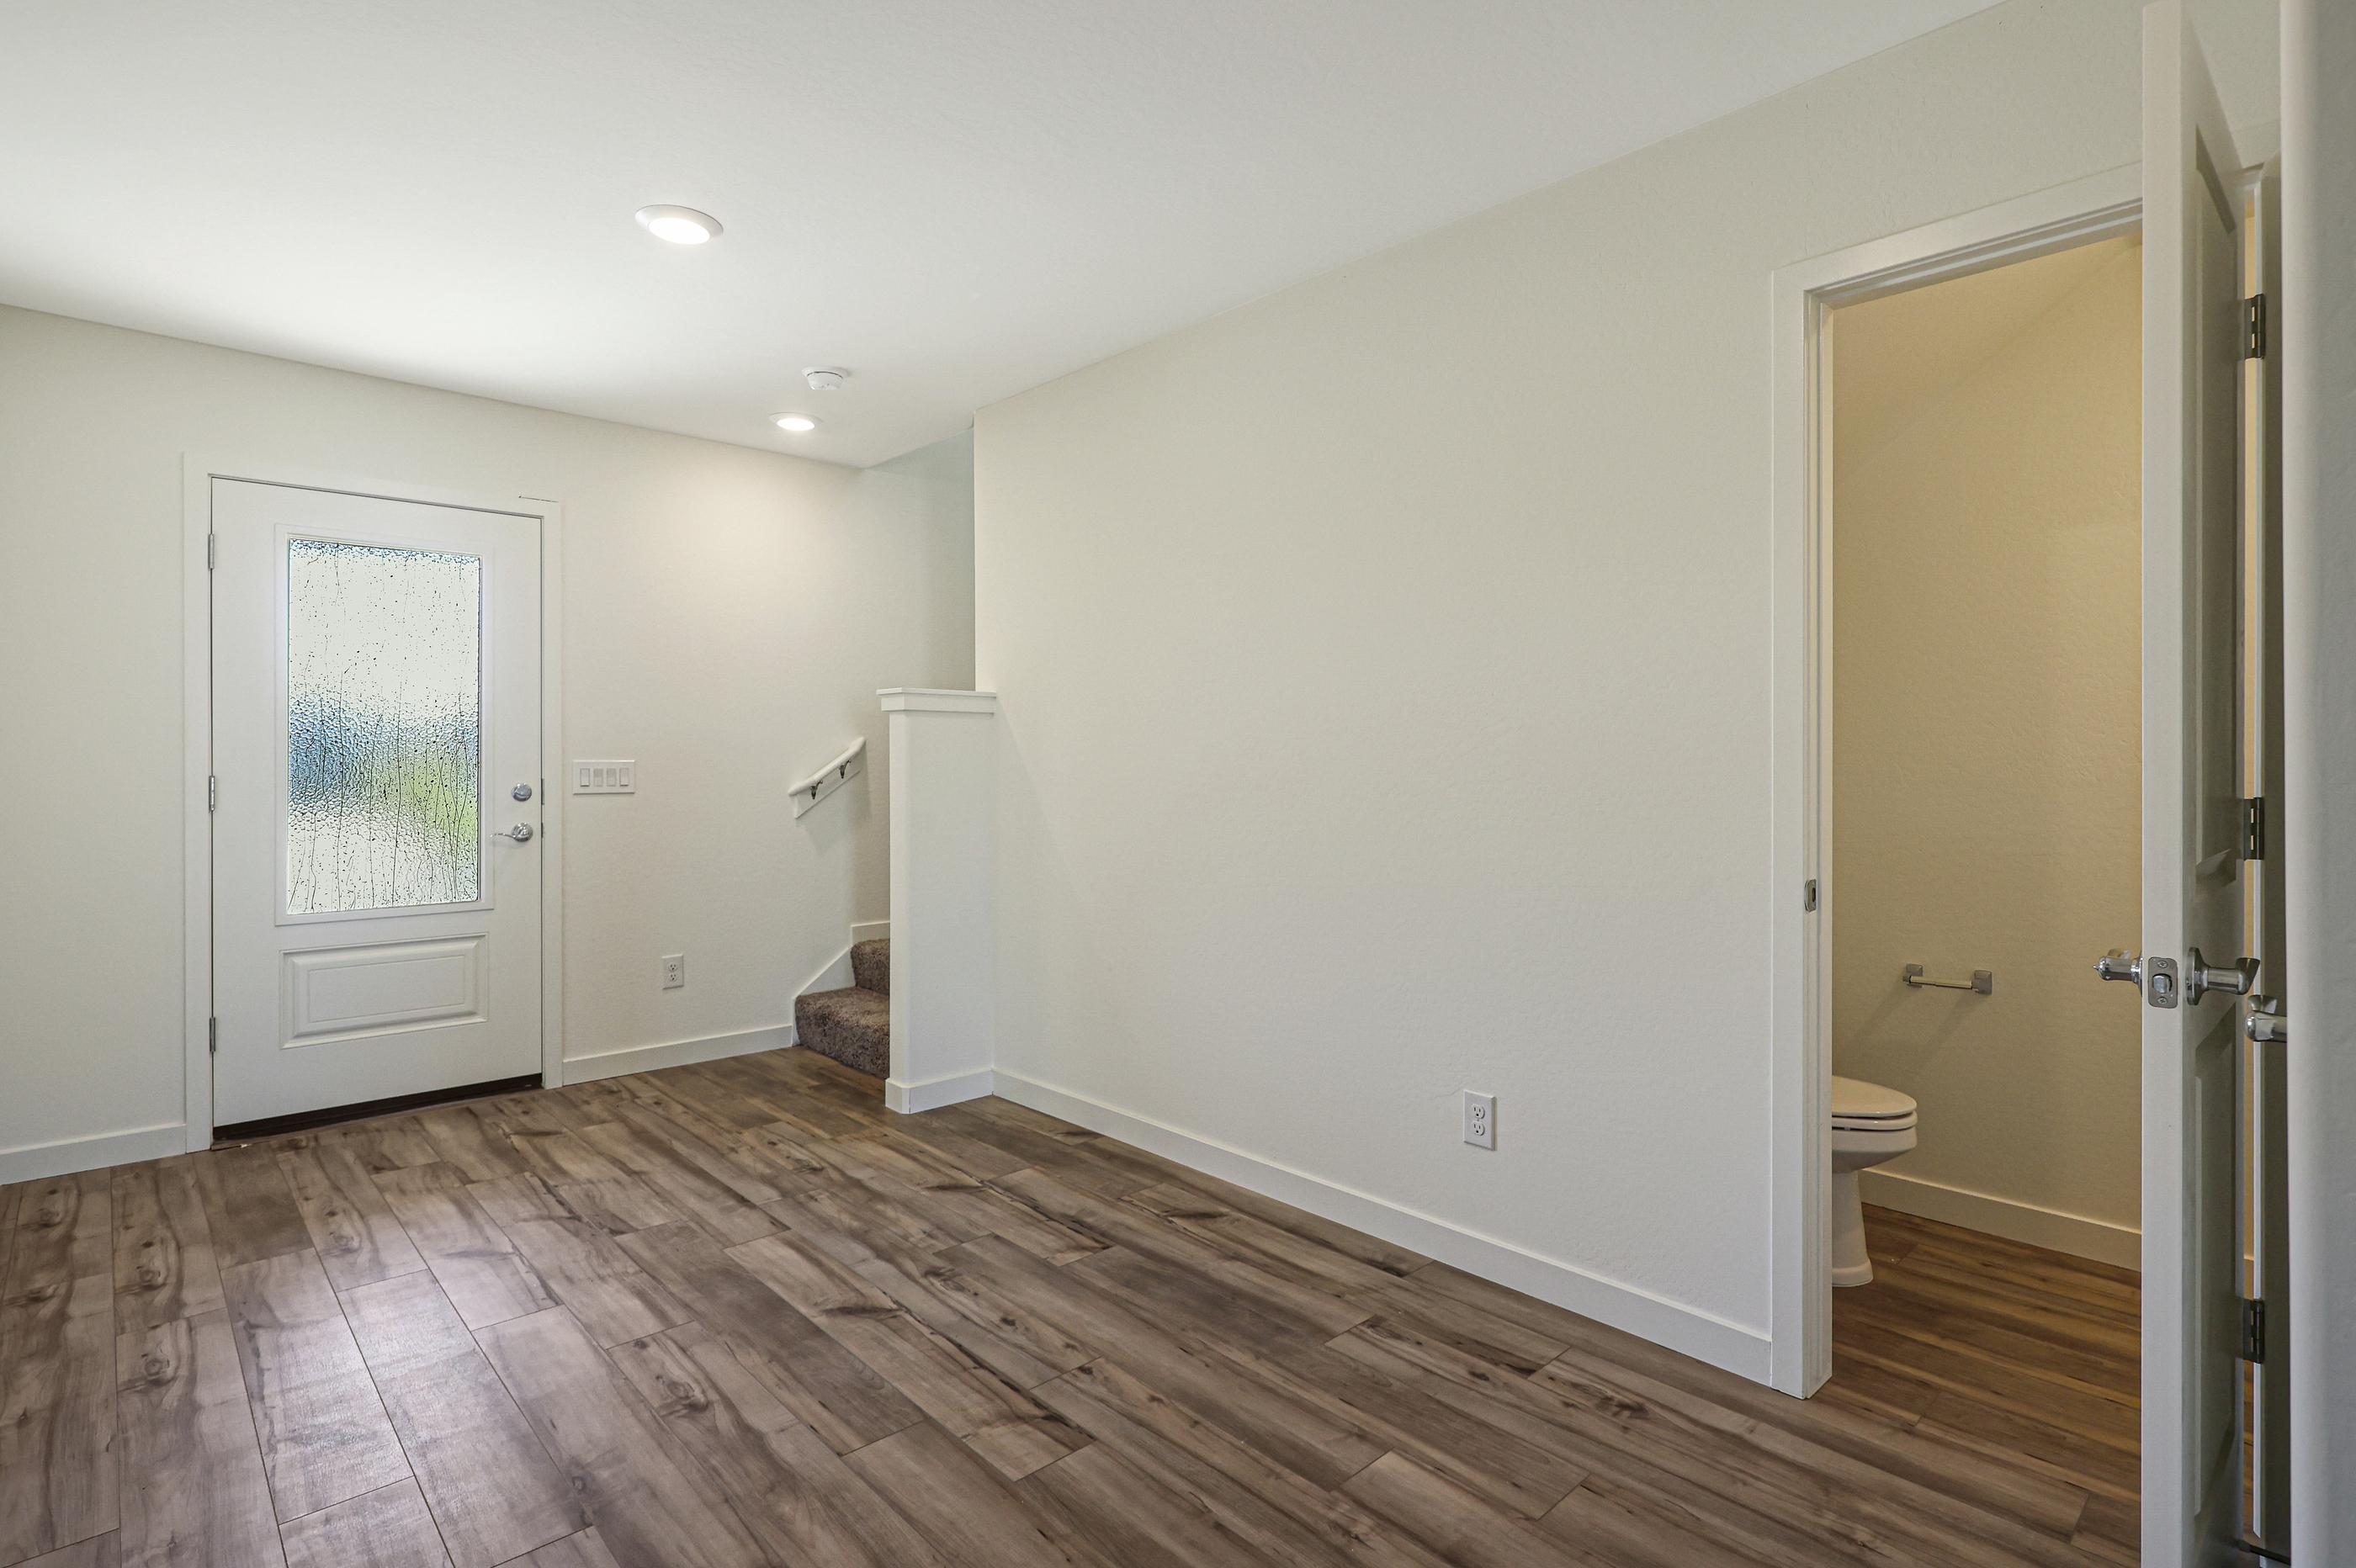 The entryway offers a spacious foyer with access to the additional bathroom and staircase.